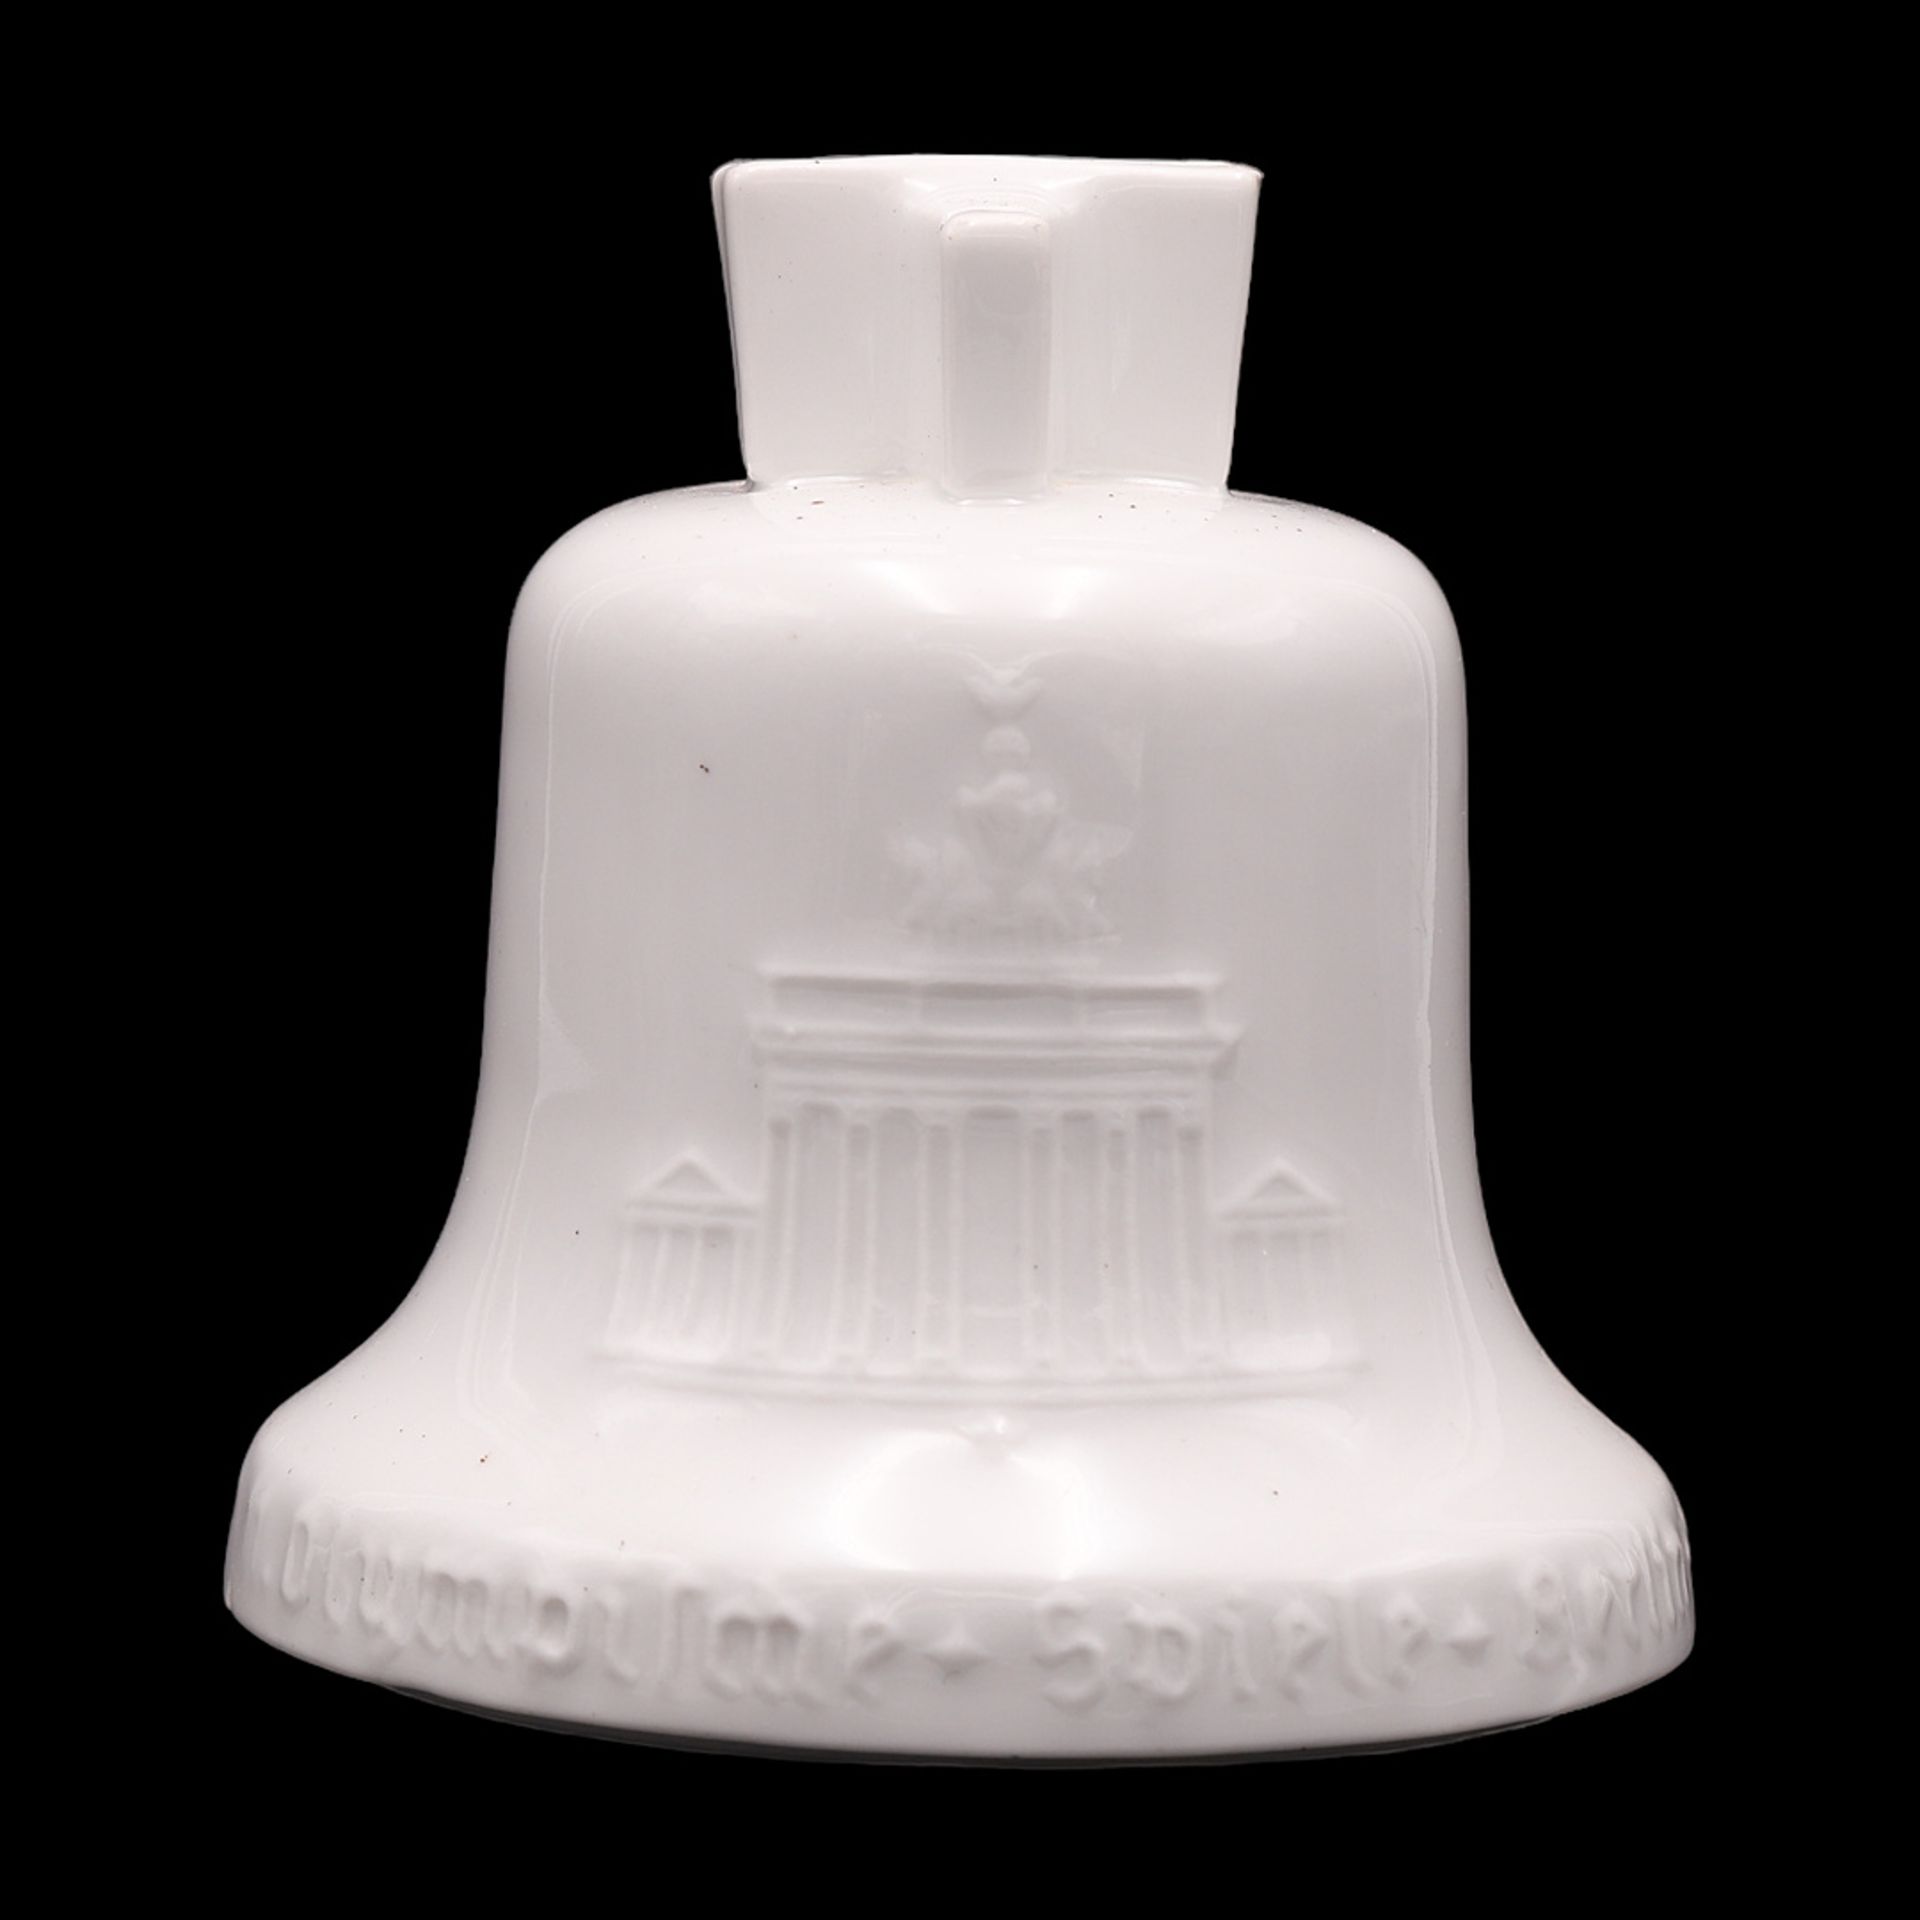 Heinrich & Co., Selb, Money box in the shape of a bell, Olympia 1936 - Image 3 of 4